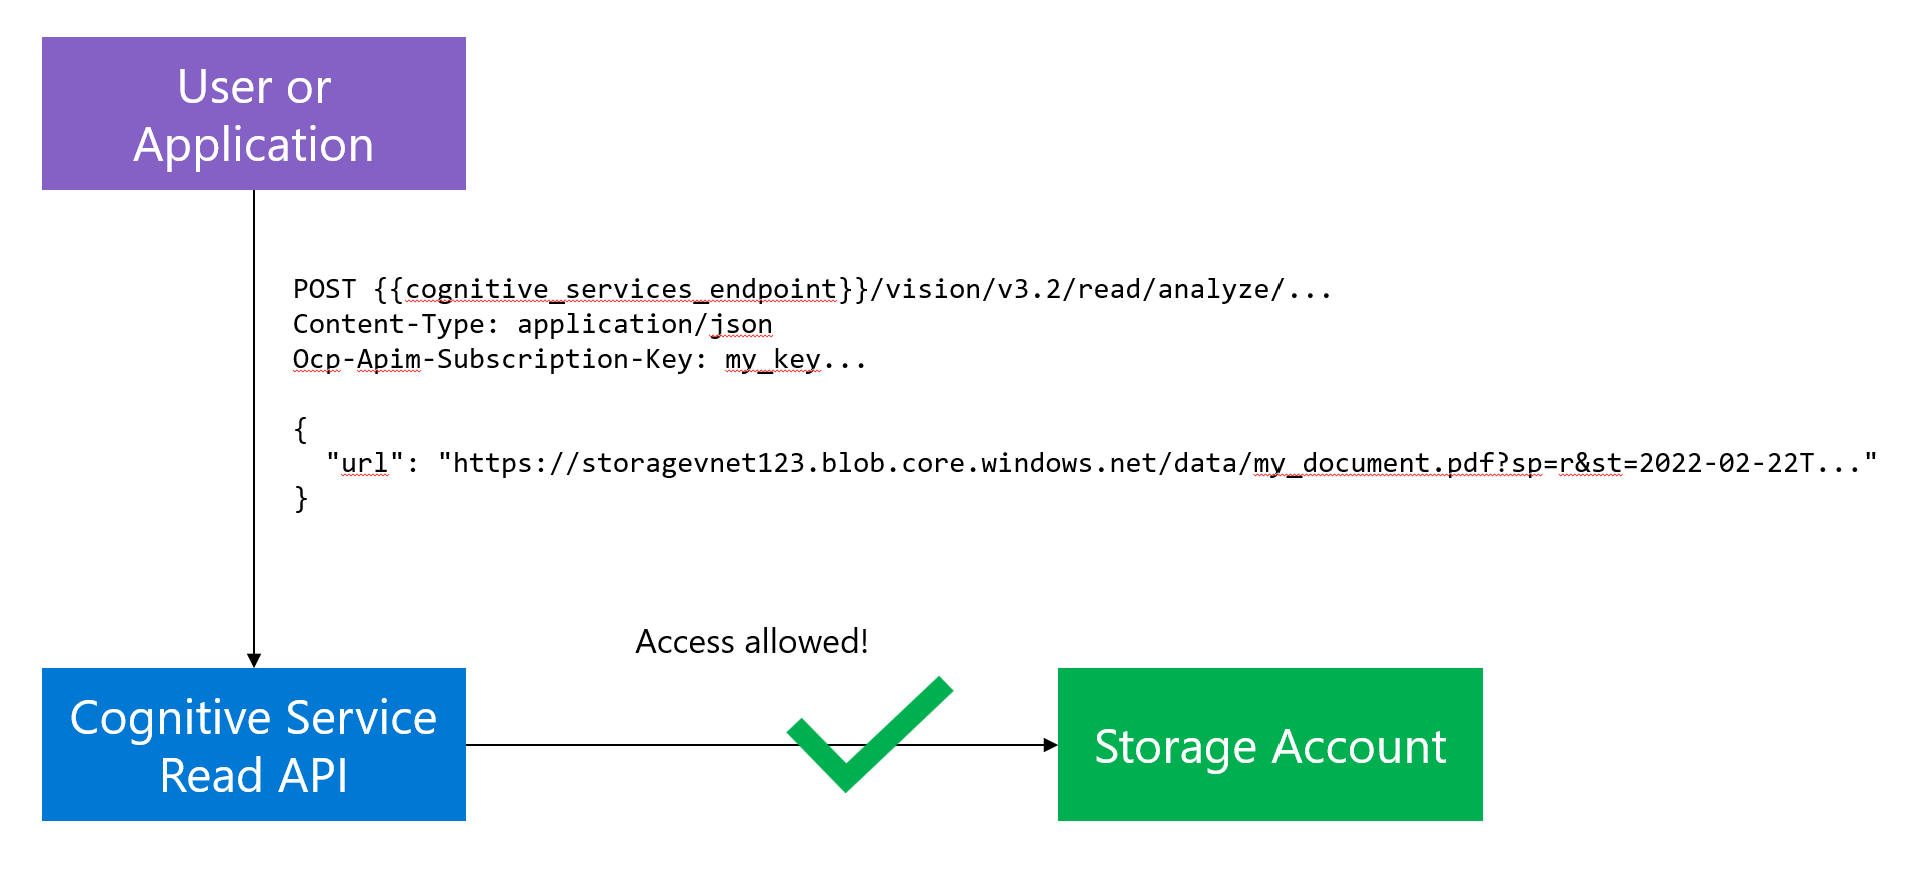 Read API can access the storage